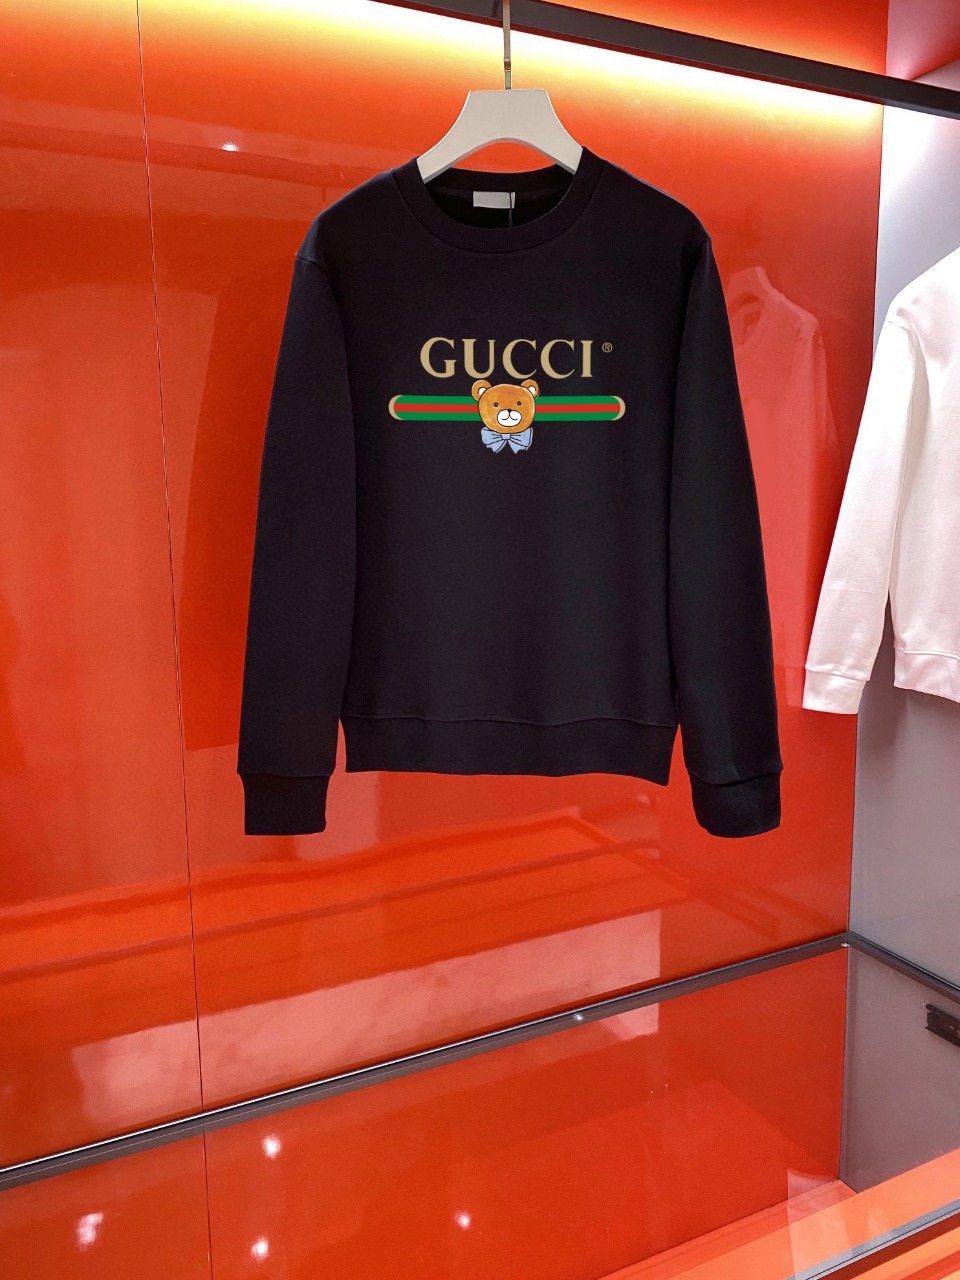 Gucci Clothing Sweatshirts Top quality Fake
 Black White Printing Unisex Cotton Fall/Winter Collection Casual